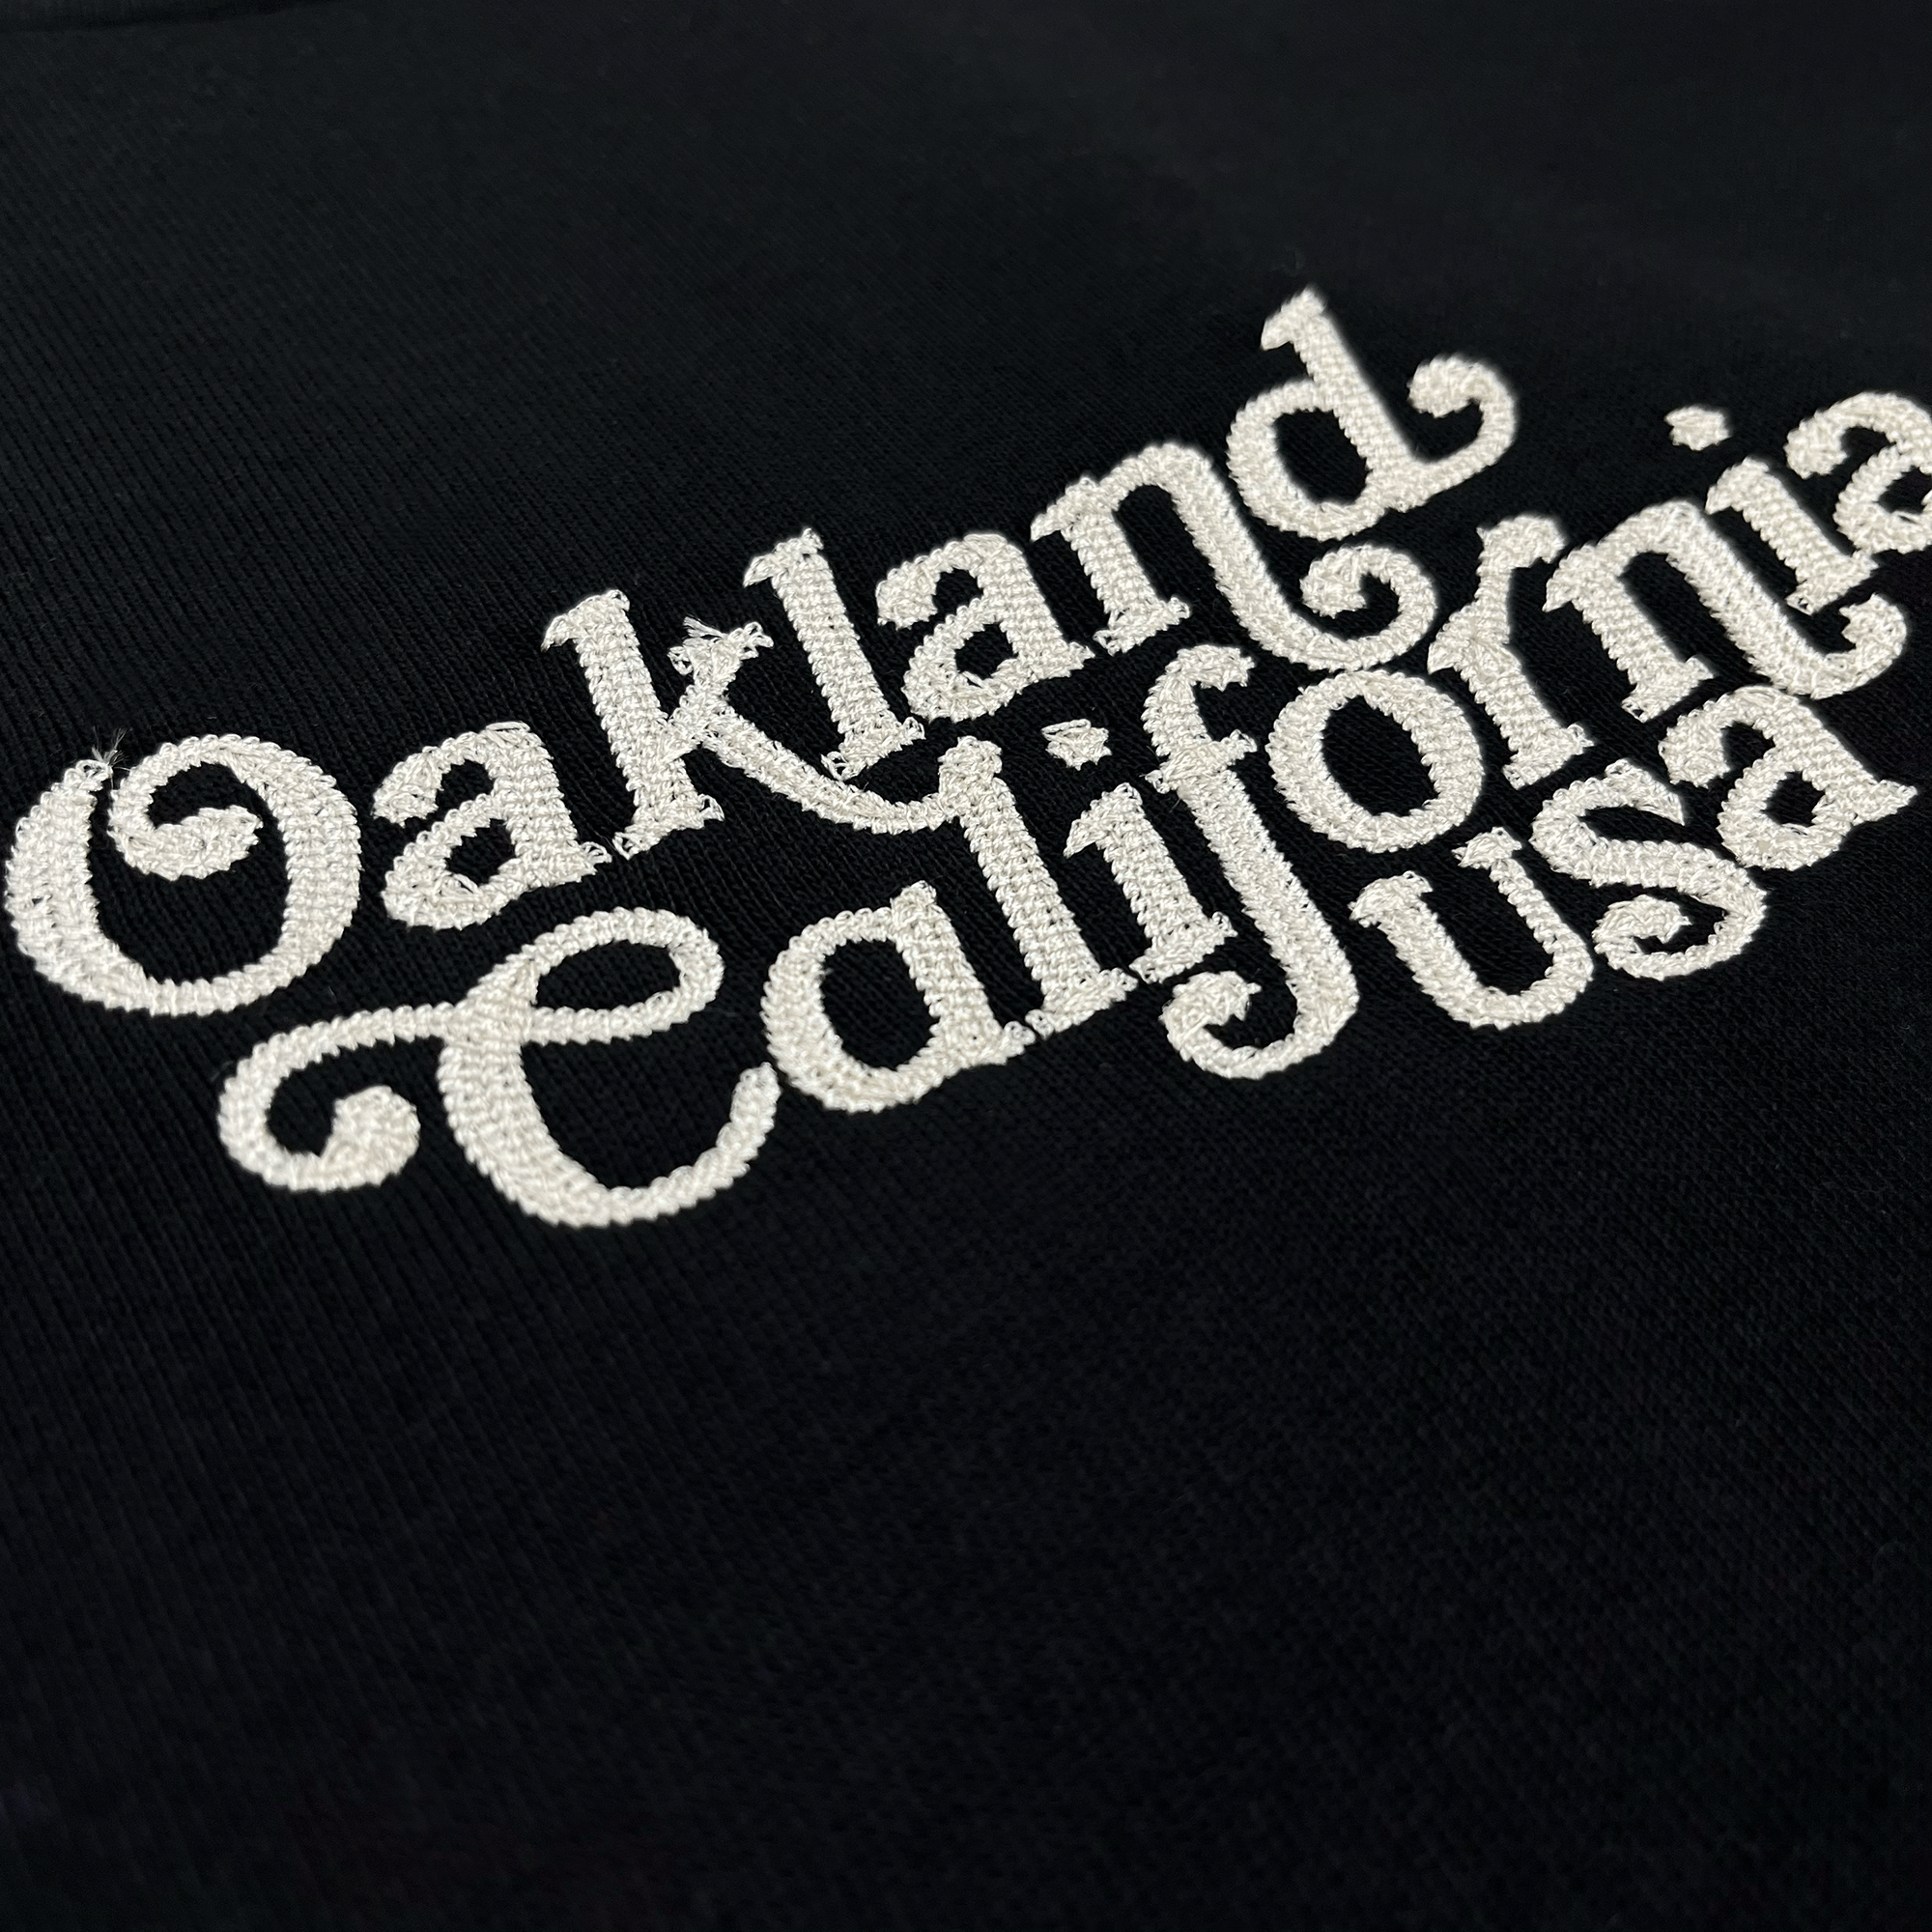 Detailed close-up of white Oakland California USA script embroidered on the chest of a black t-shirt.